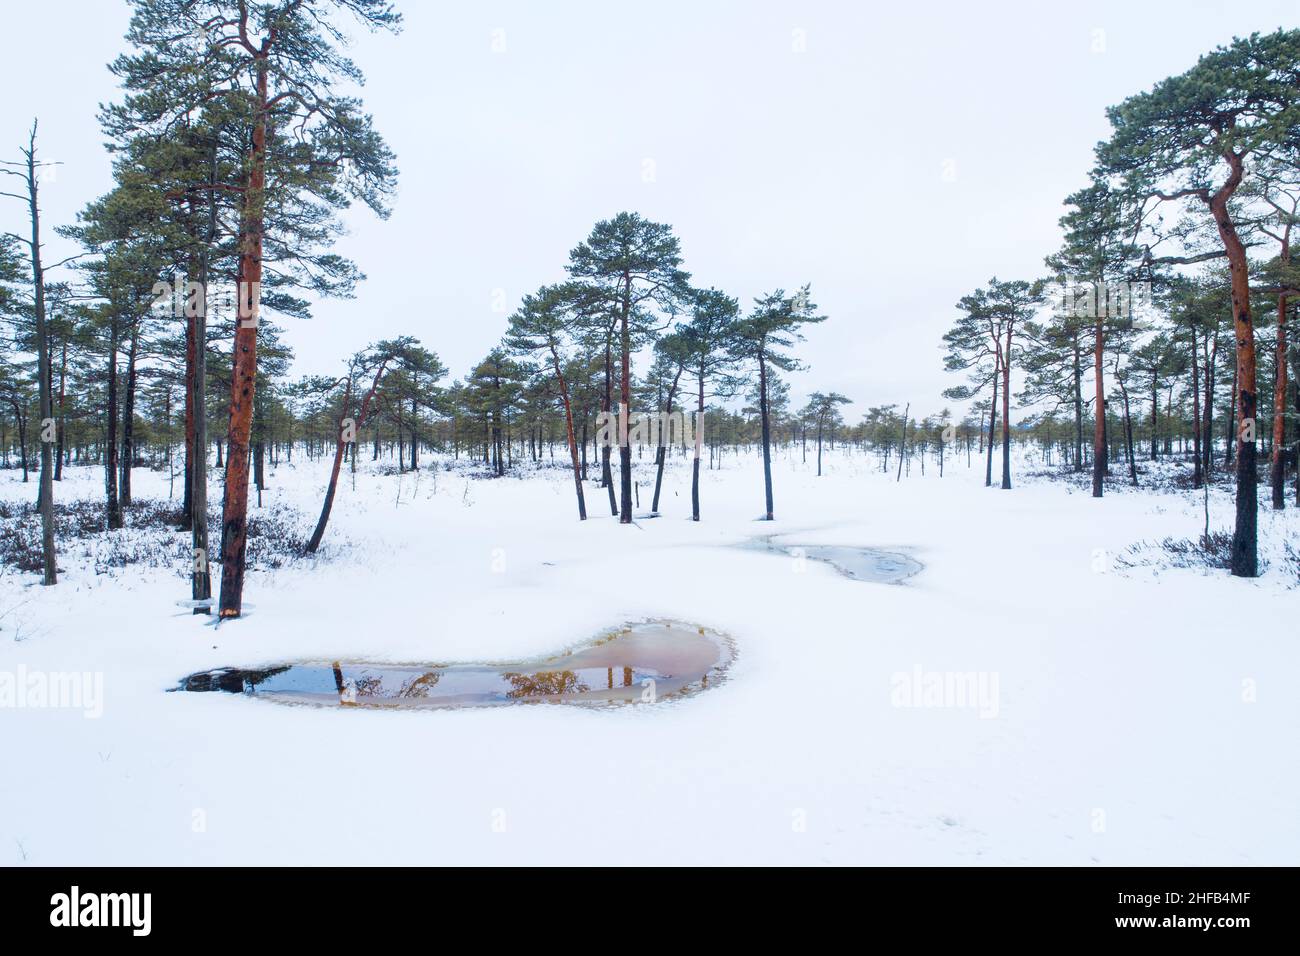 Scots pine trees in a snowy bog landscape in Soomaa National Park, Estonia. Stock Photo